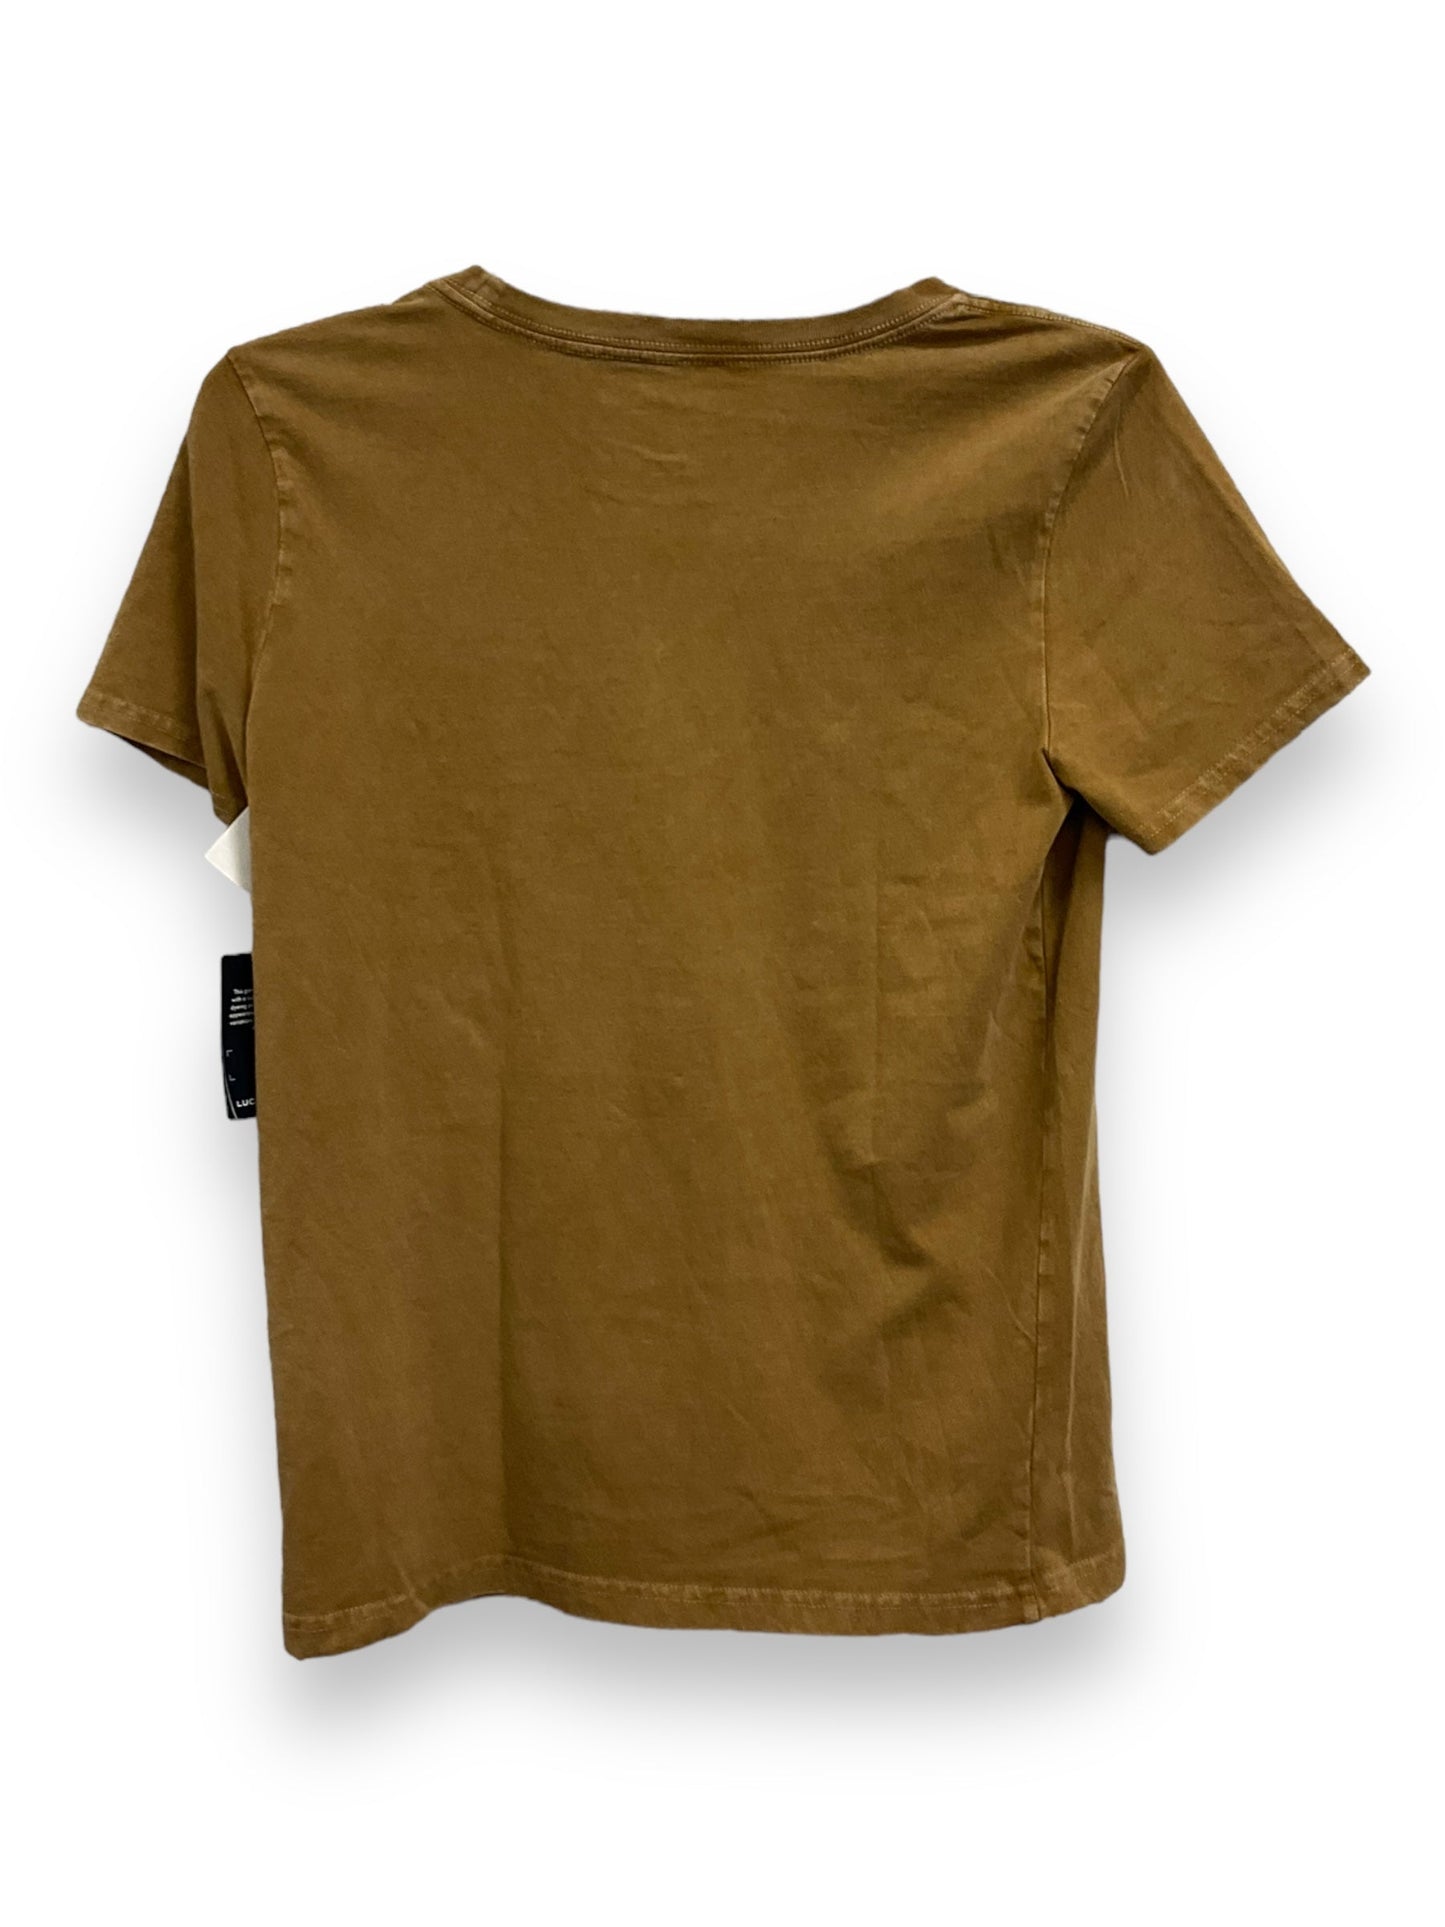 Brown Top Short Sleeve Lucky Brand, Size S